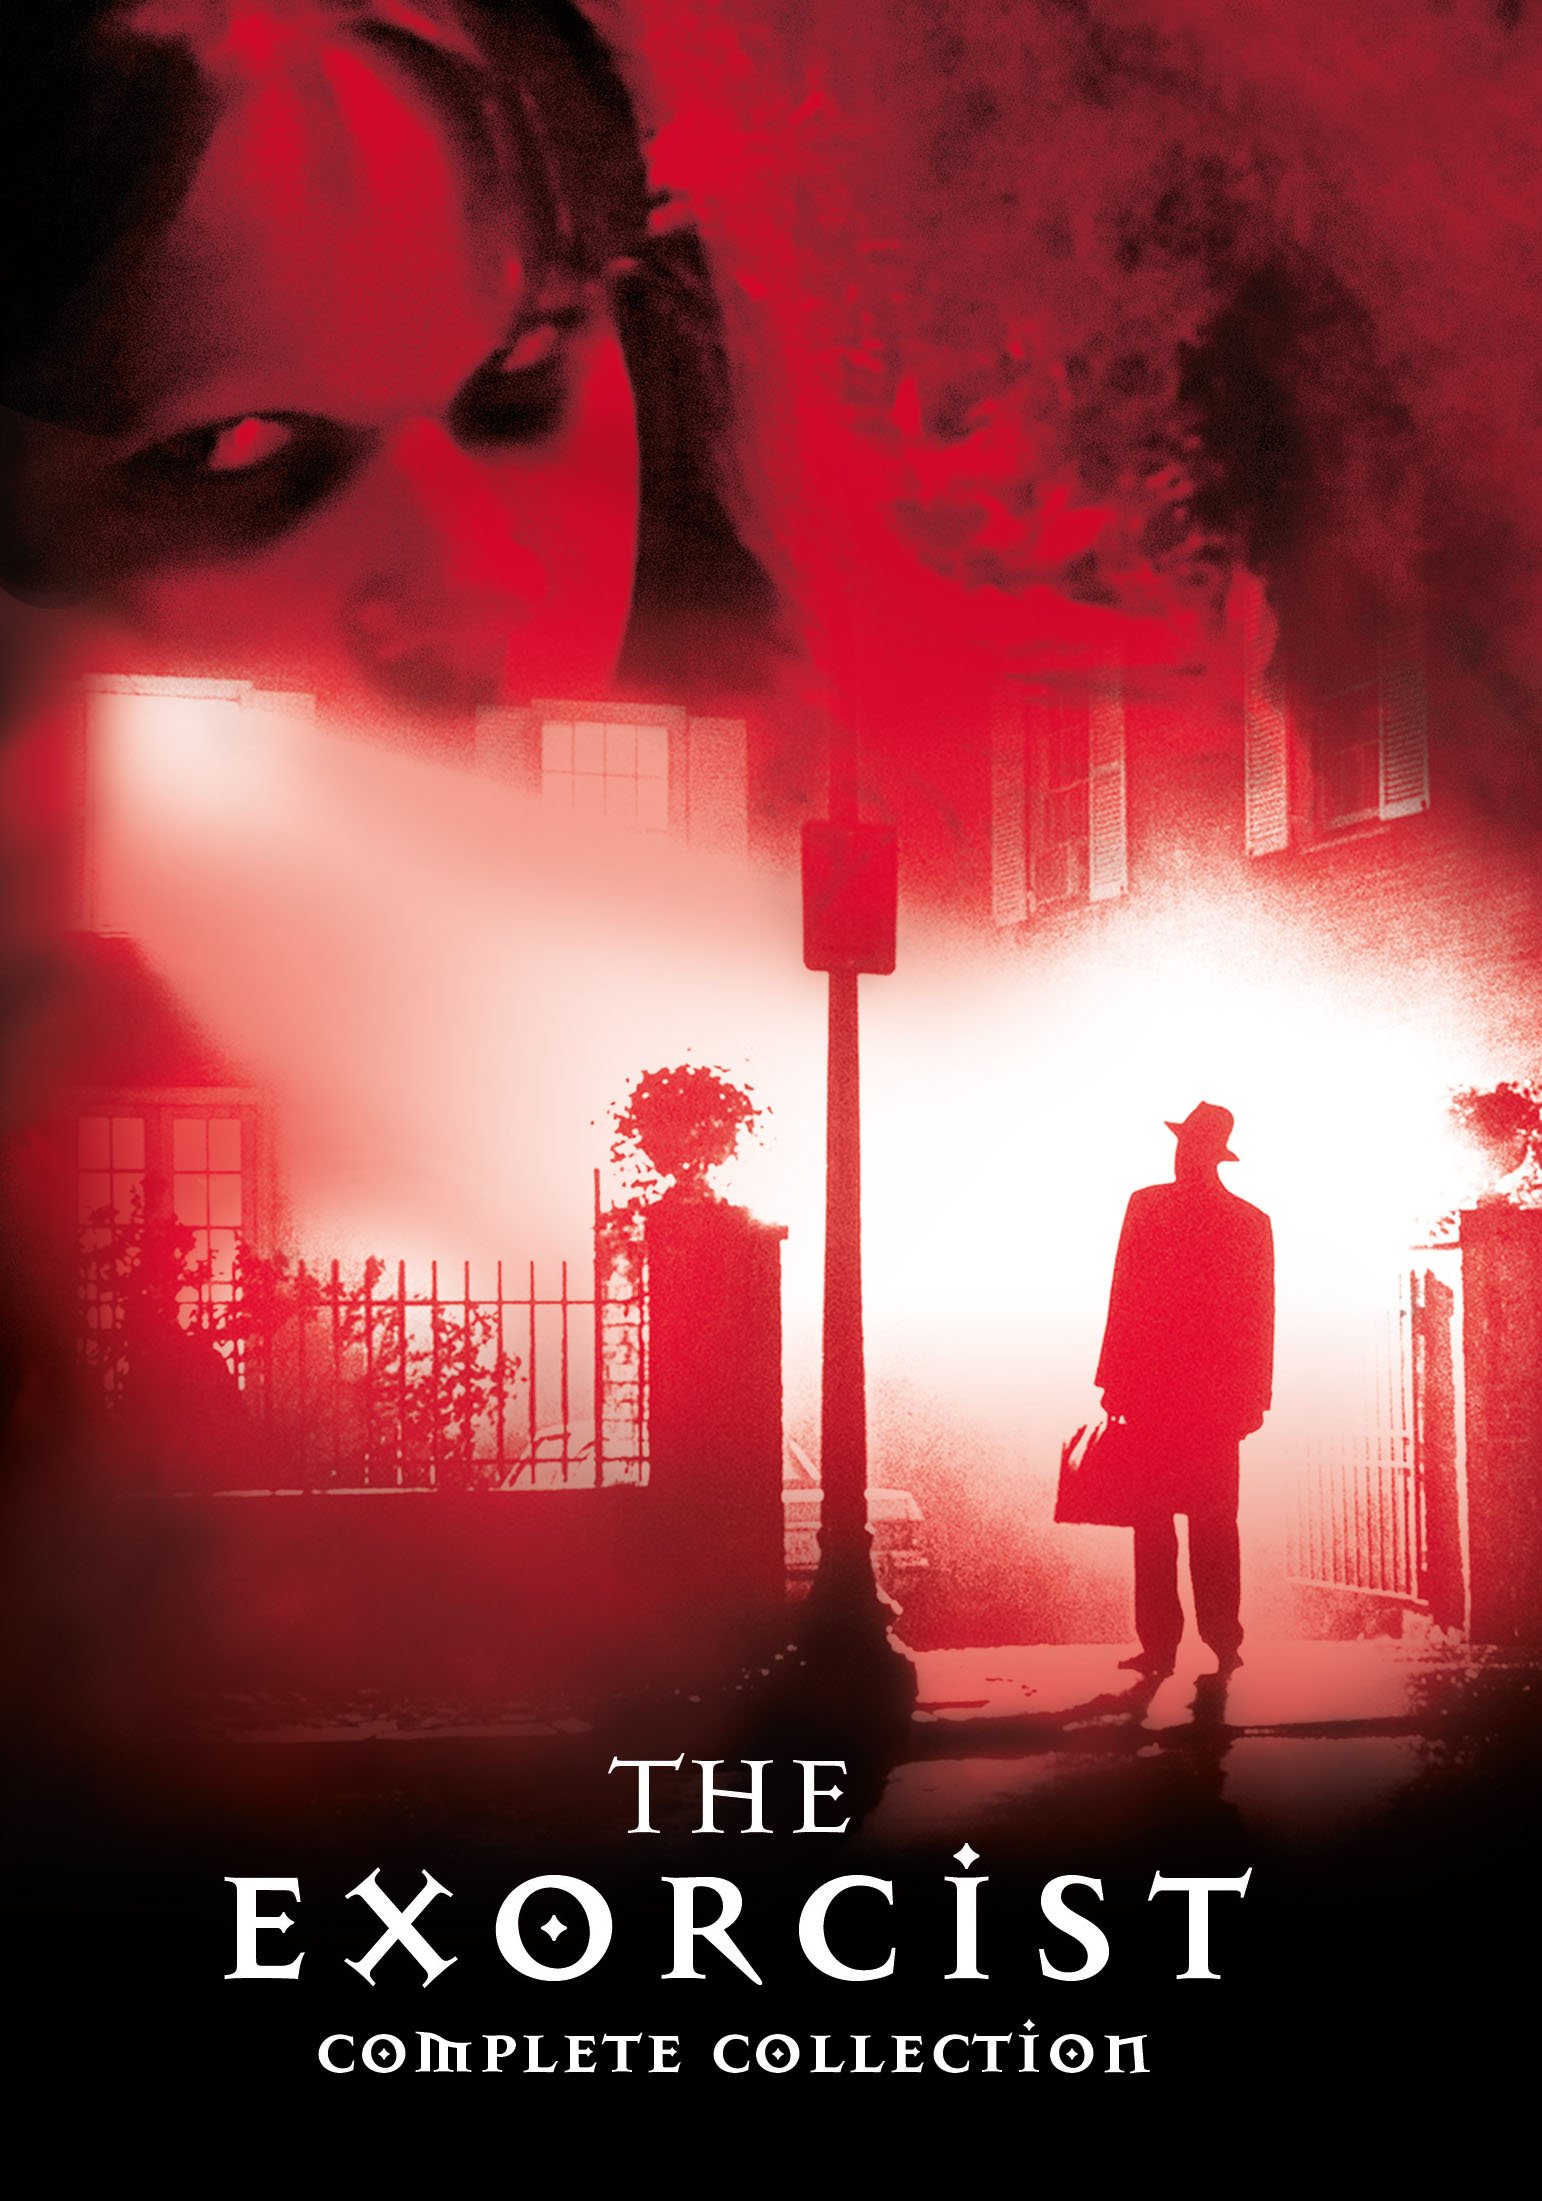 the-exorcist-complete-collections-movie-purchase-or-watch-online